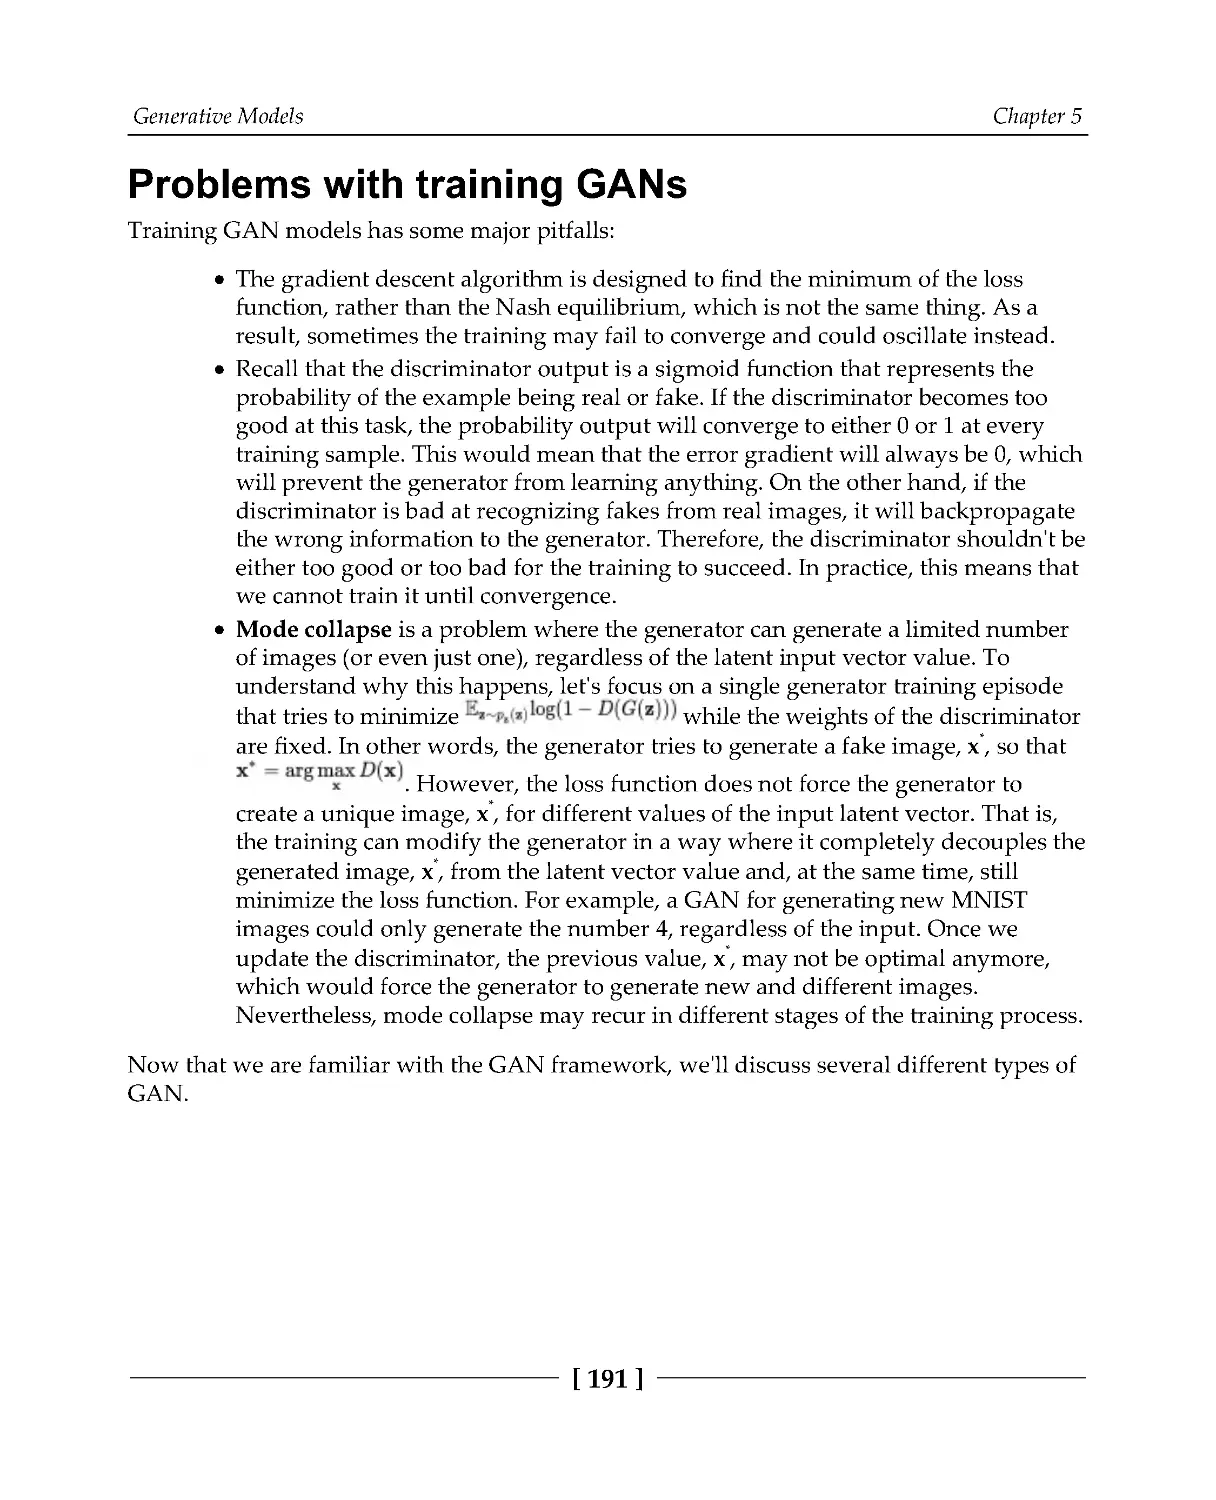 Problems with training GANs